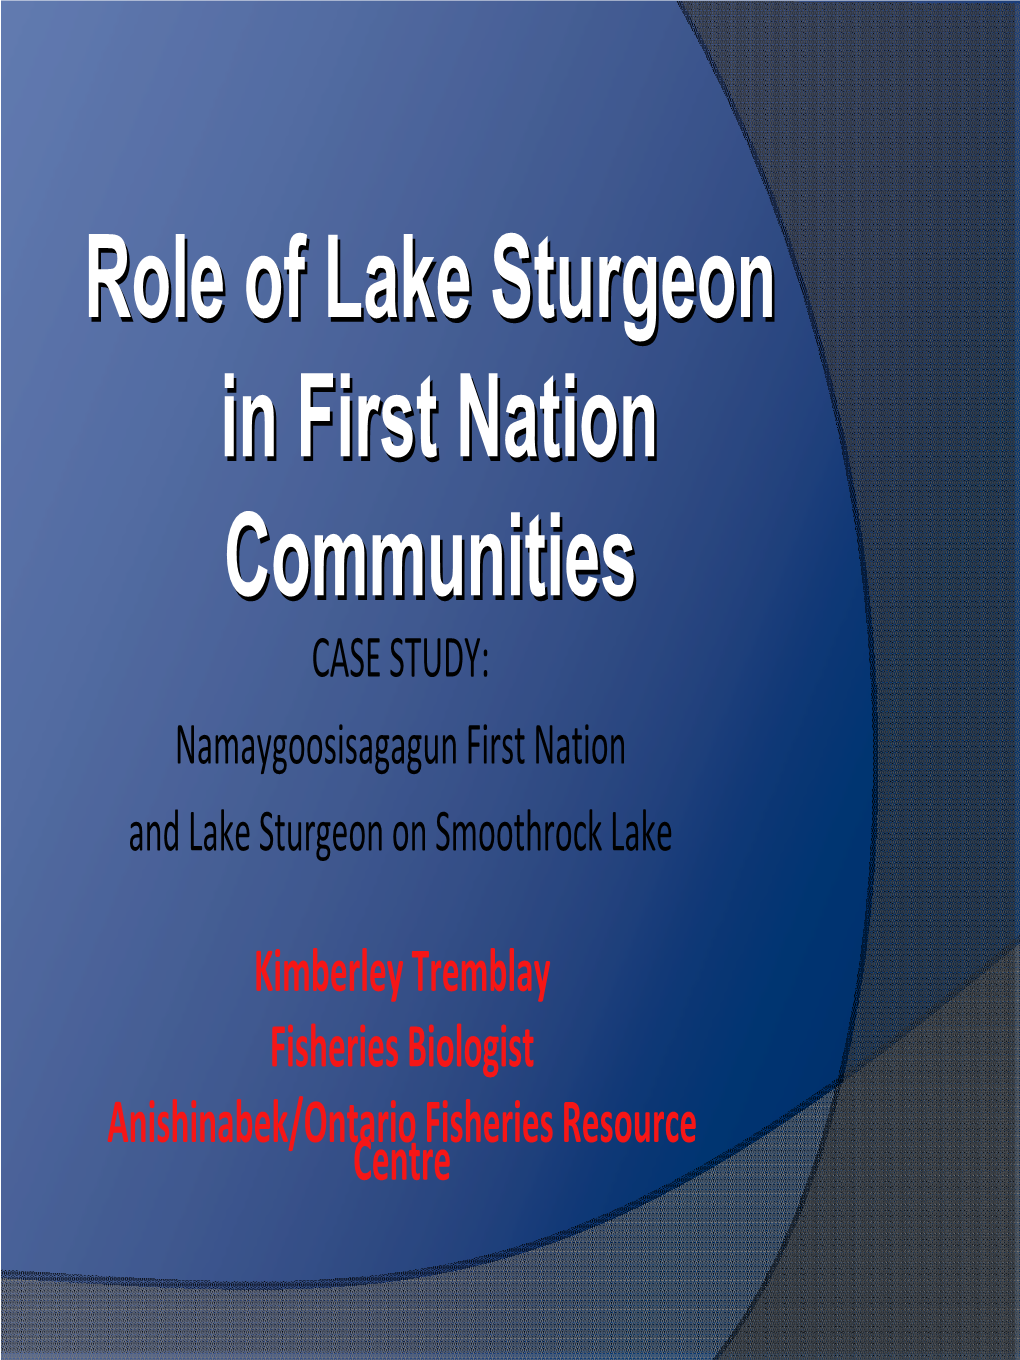 Role of Lake Sturgeon in First Nation Communities